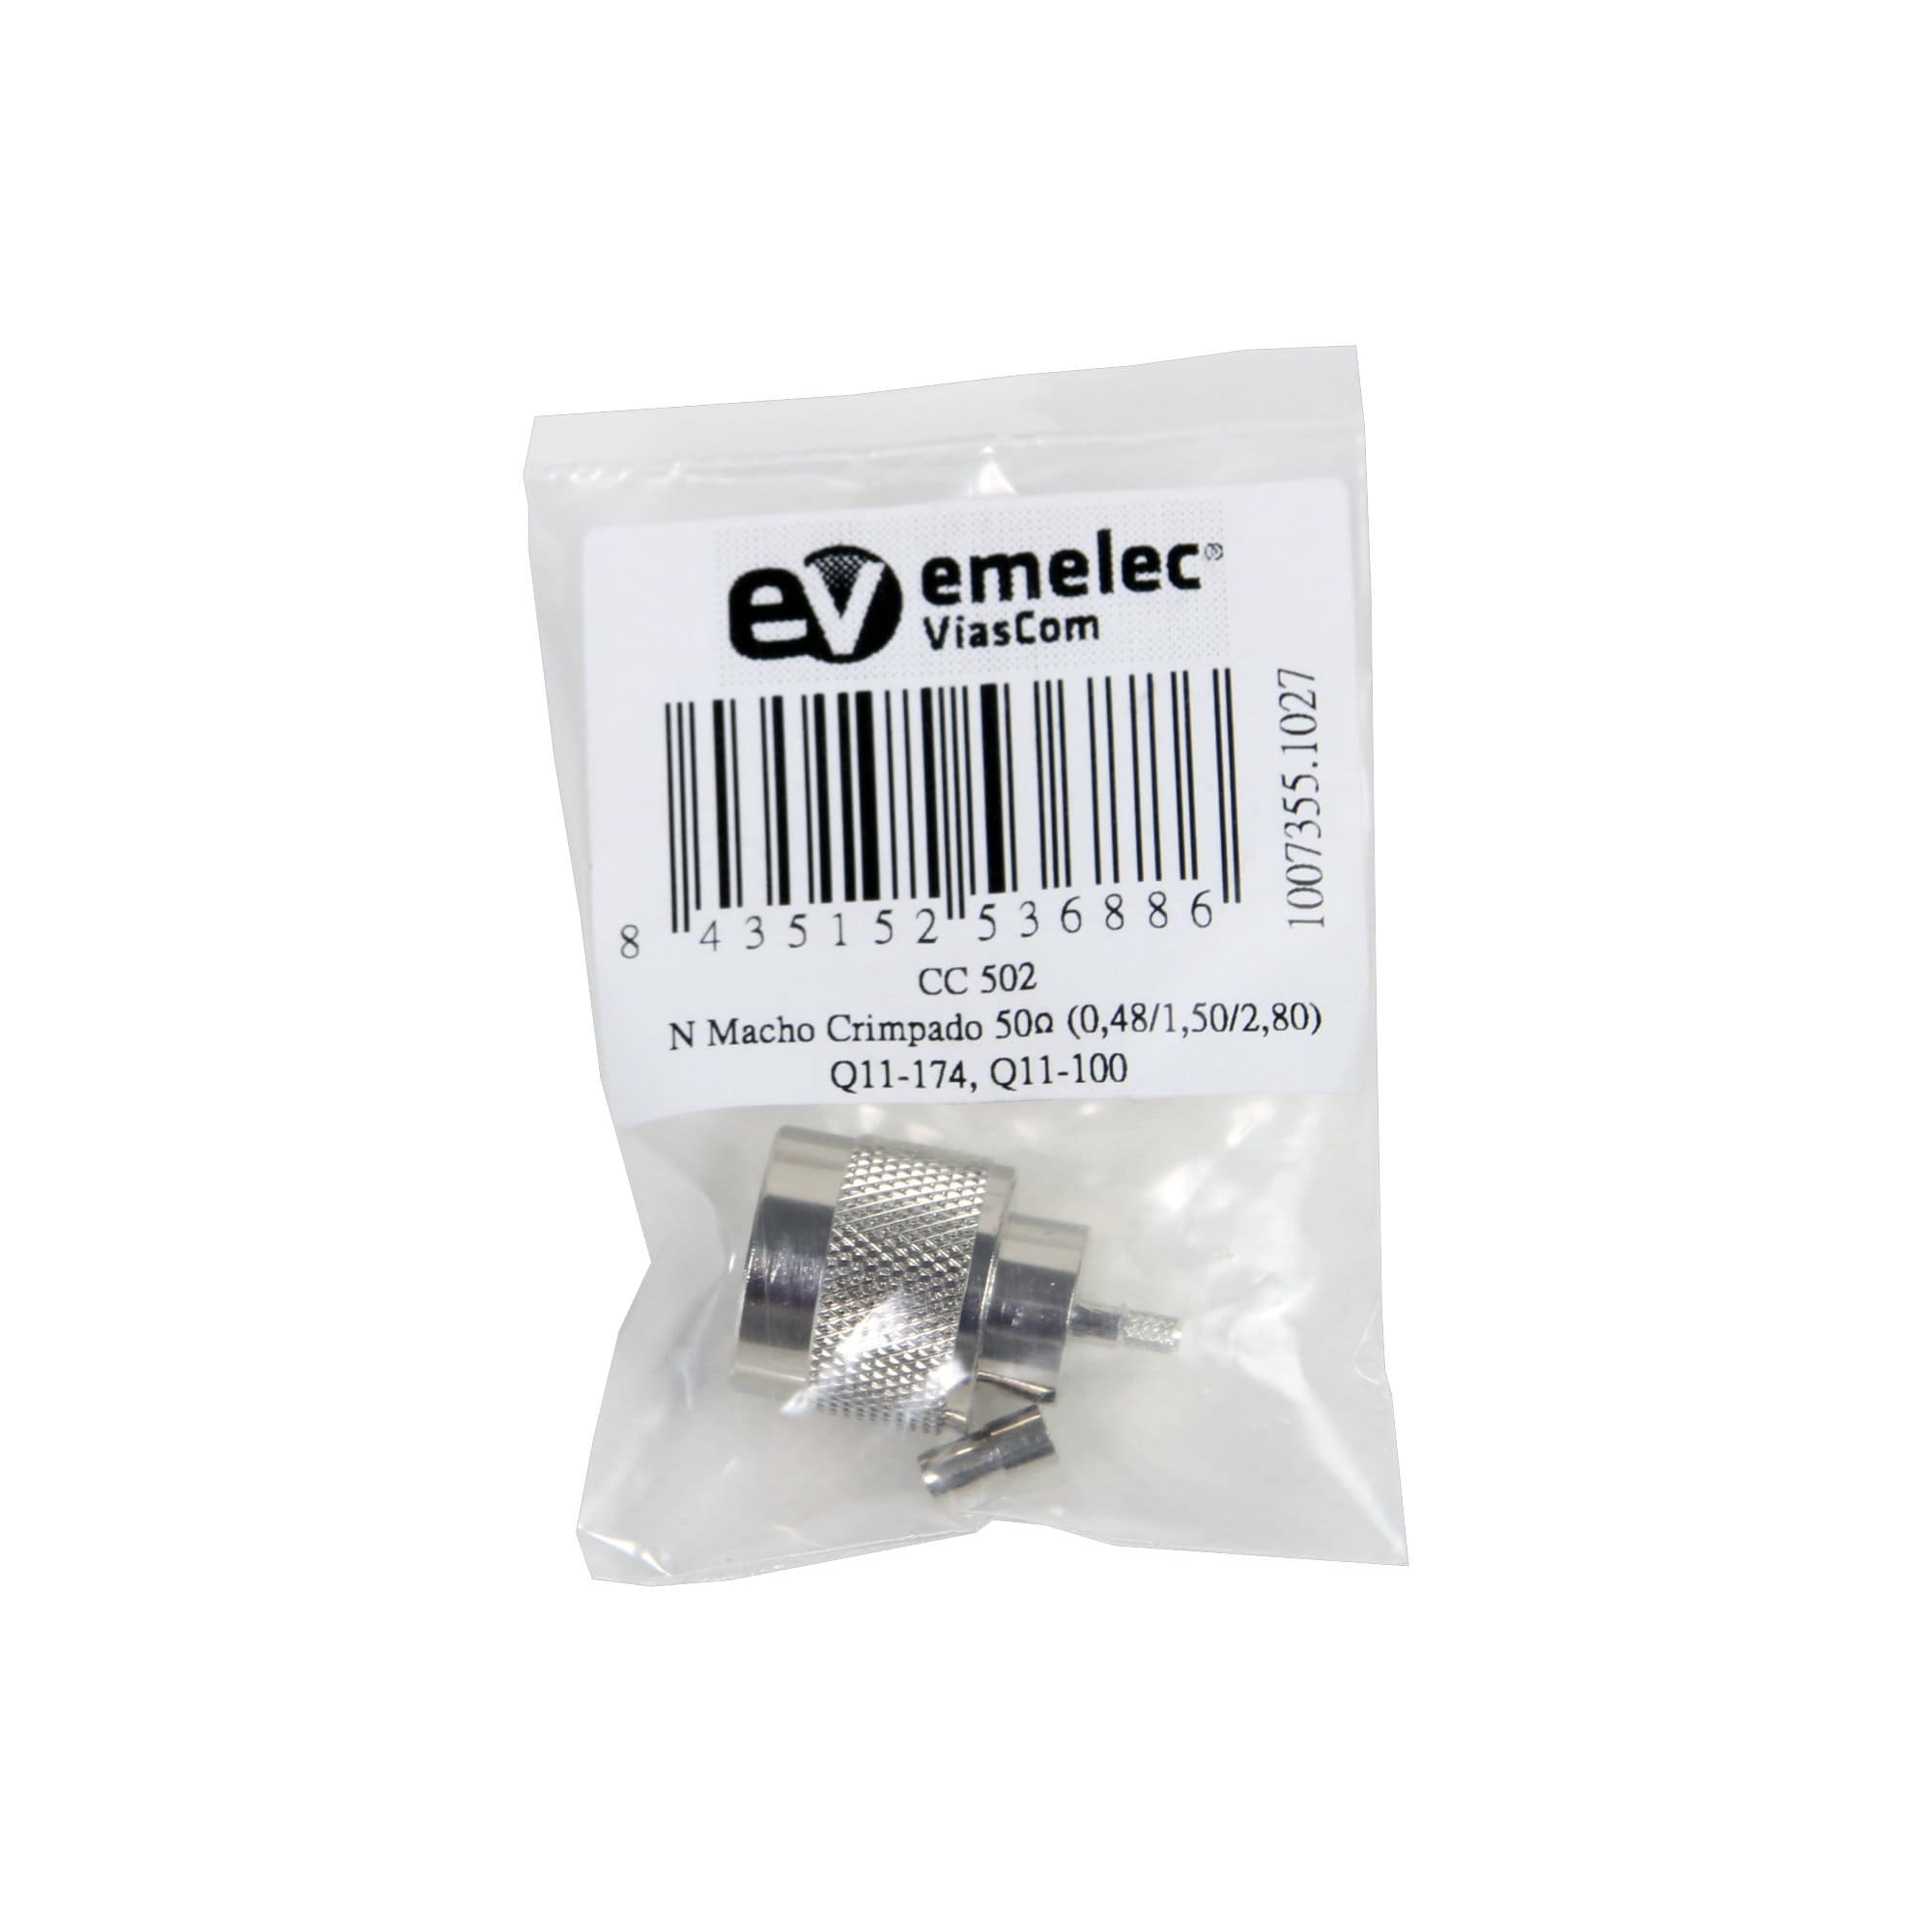 Bag with Coaxial Connector N Male Crimped 50 Ohms of Emelec VíasCom